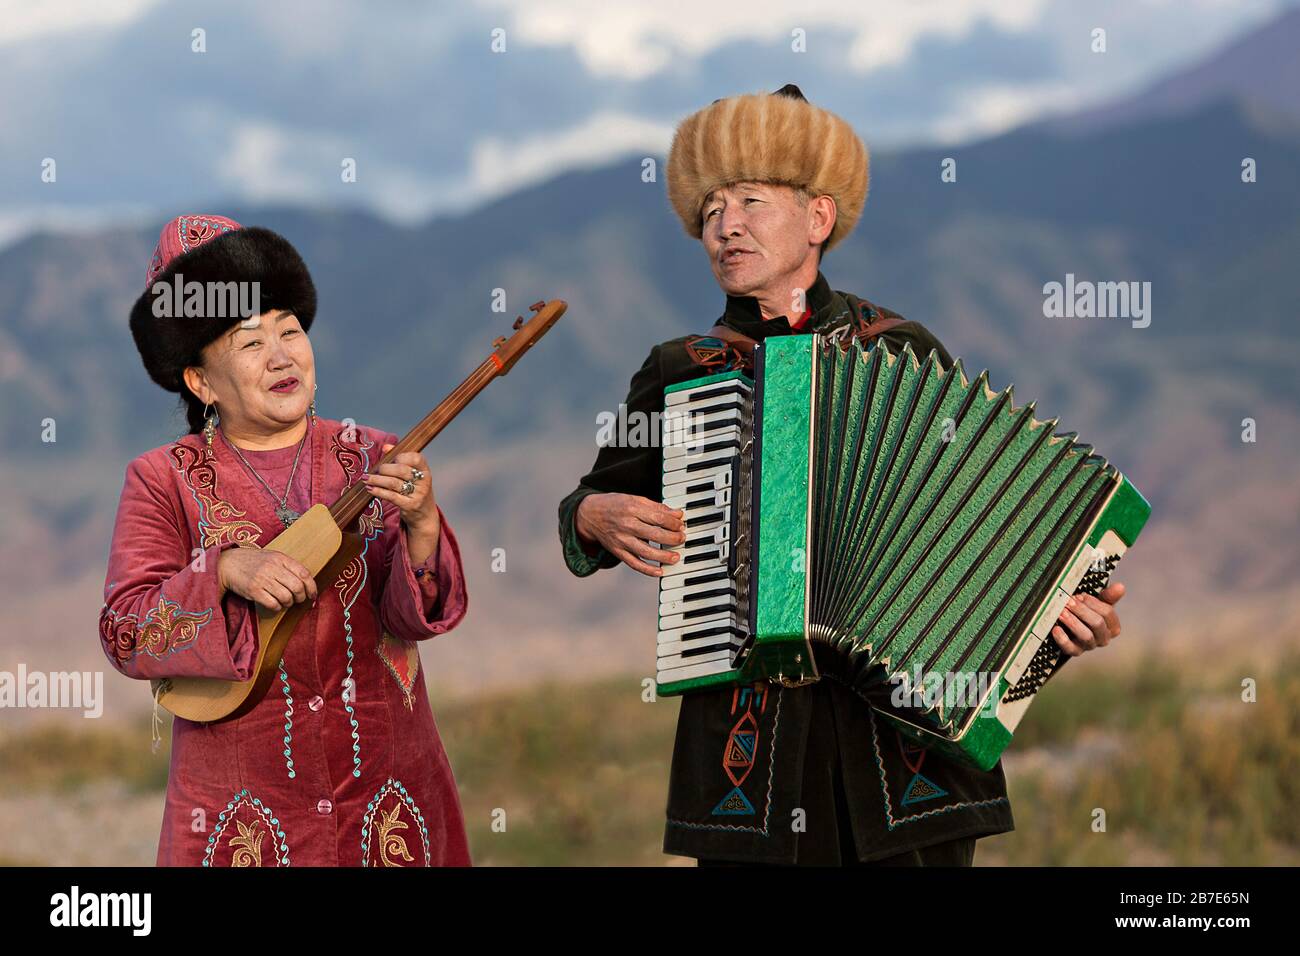 Musicians playing local traditional instruments, in Issyk Kul, Kyrgyzstan Stock Photo